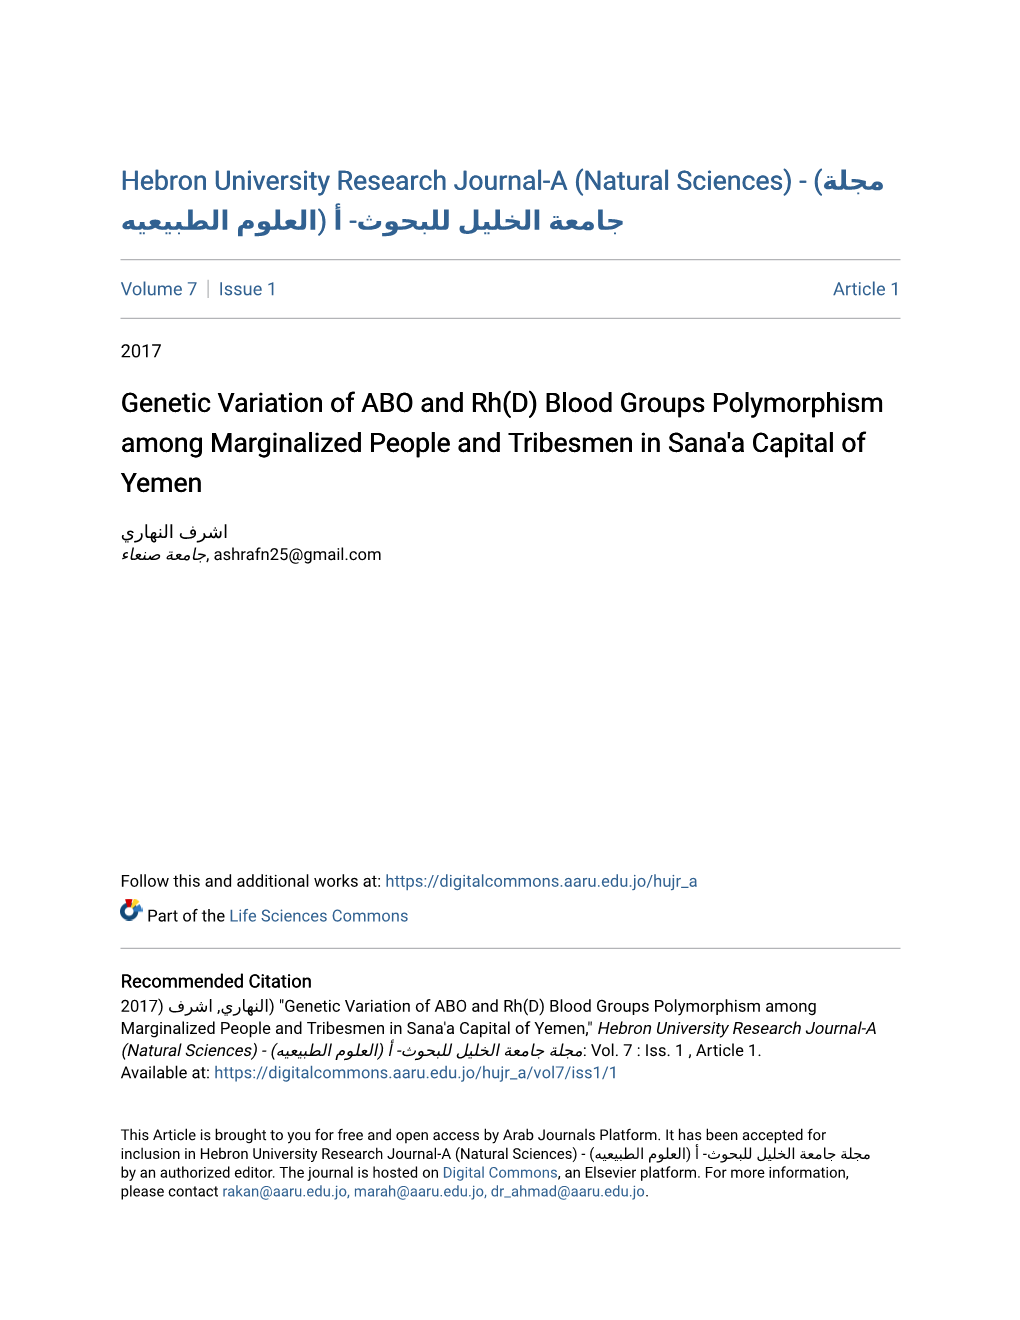 Genetic Variation of ABO and Rh(D) Blood Groups Polymorphism Among Marginalized People and Tribesmen in Sana'a Capital of Yemen